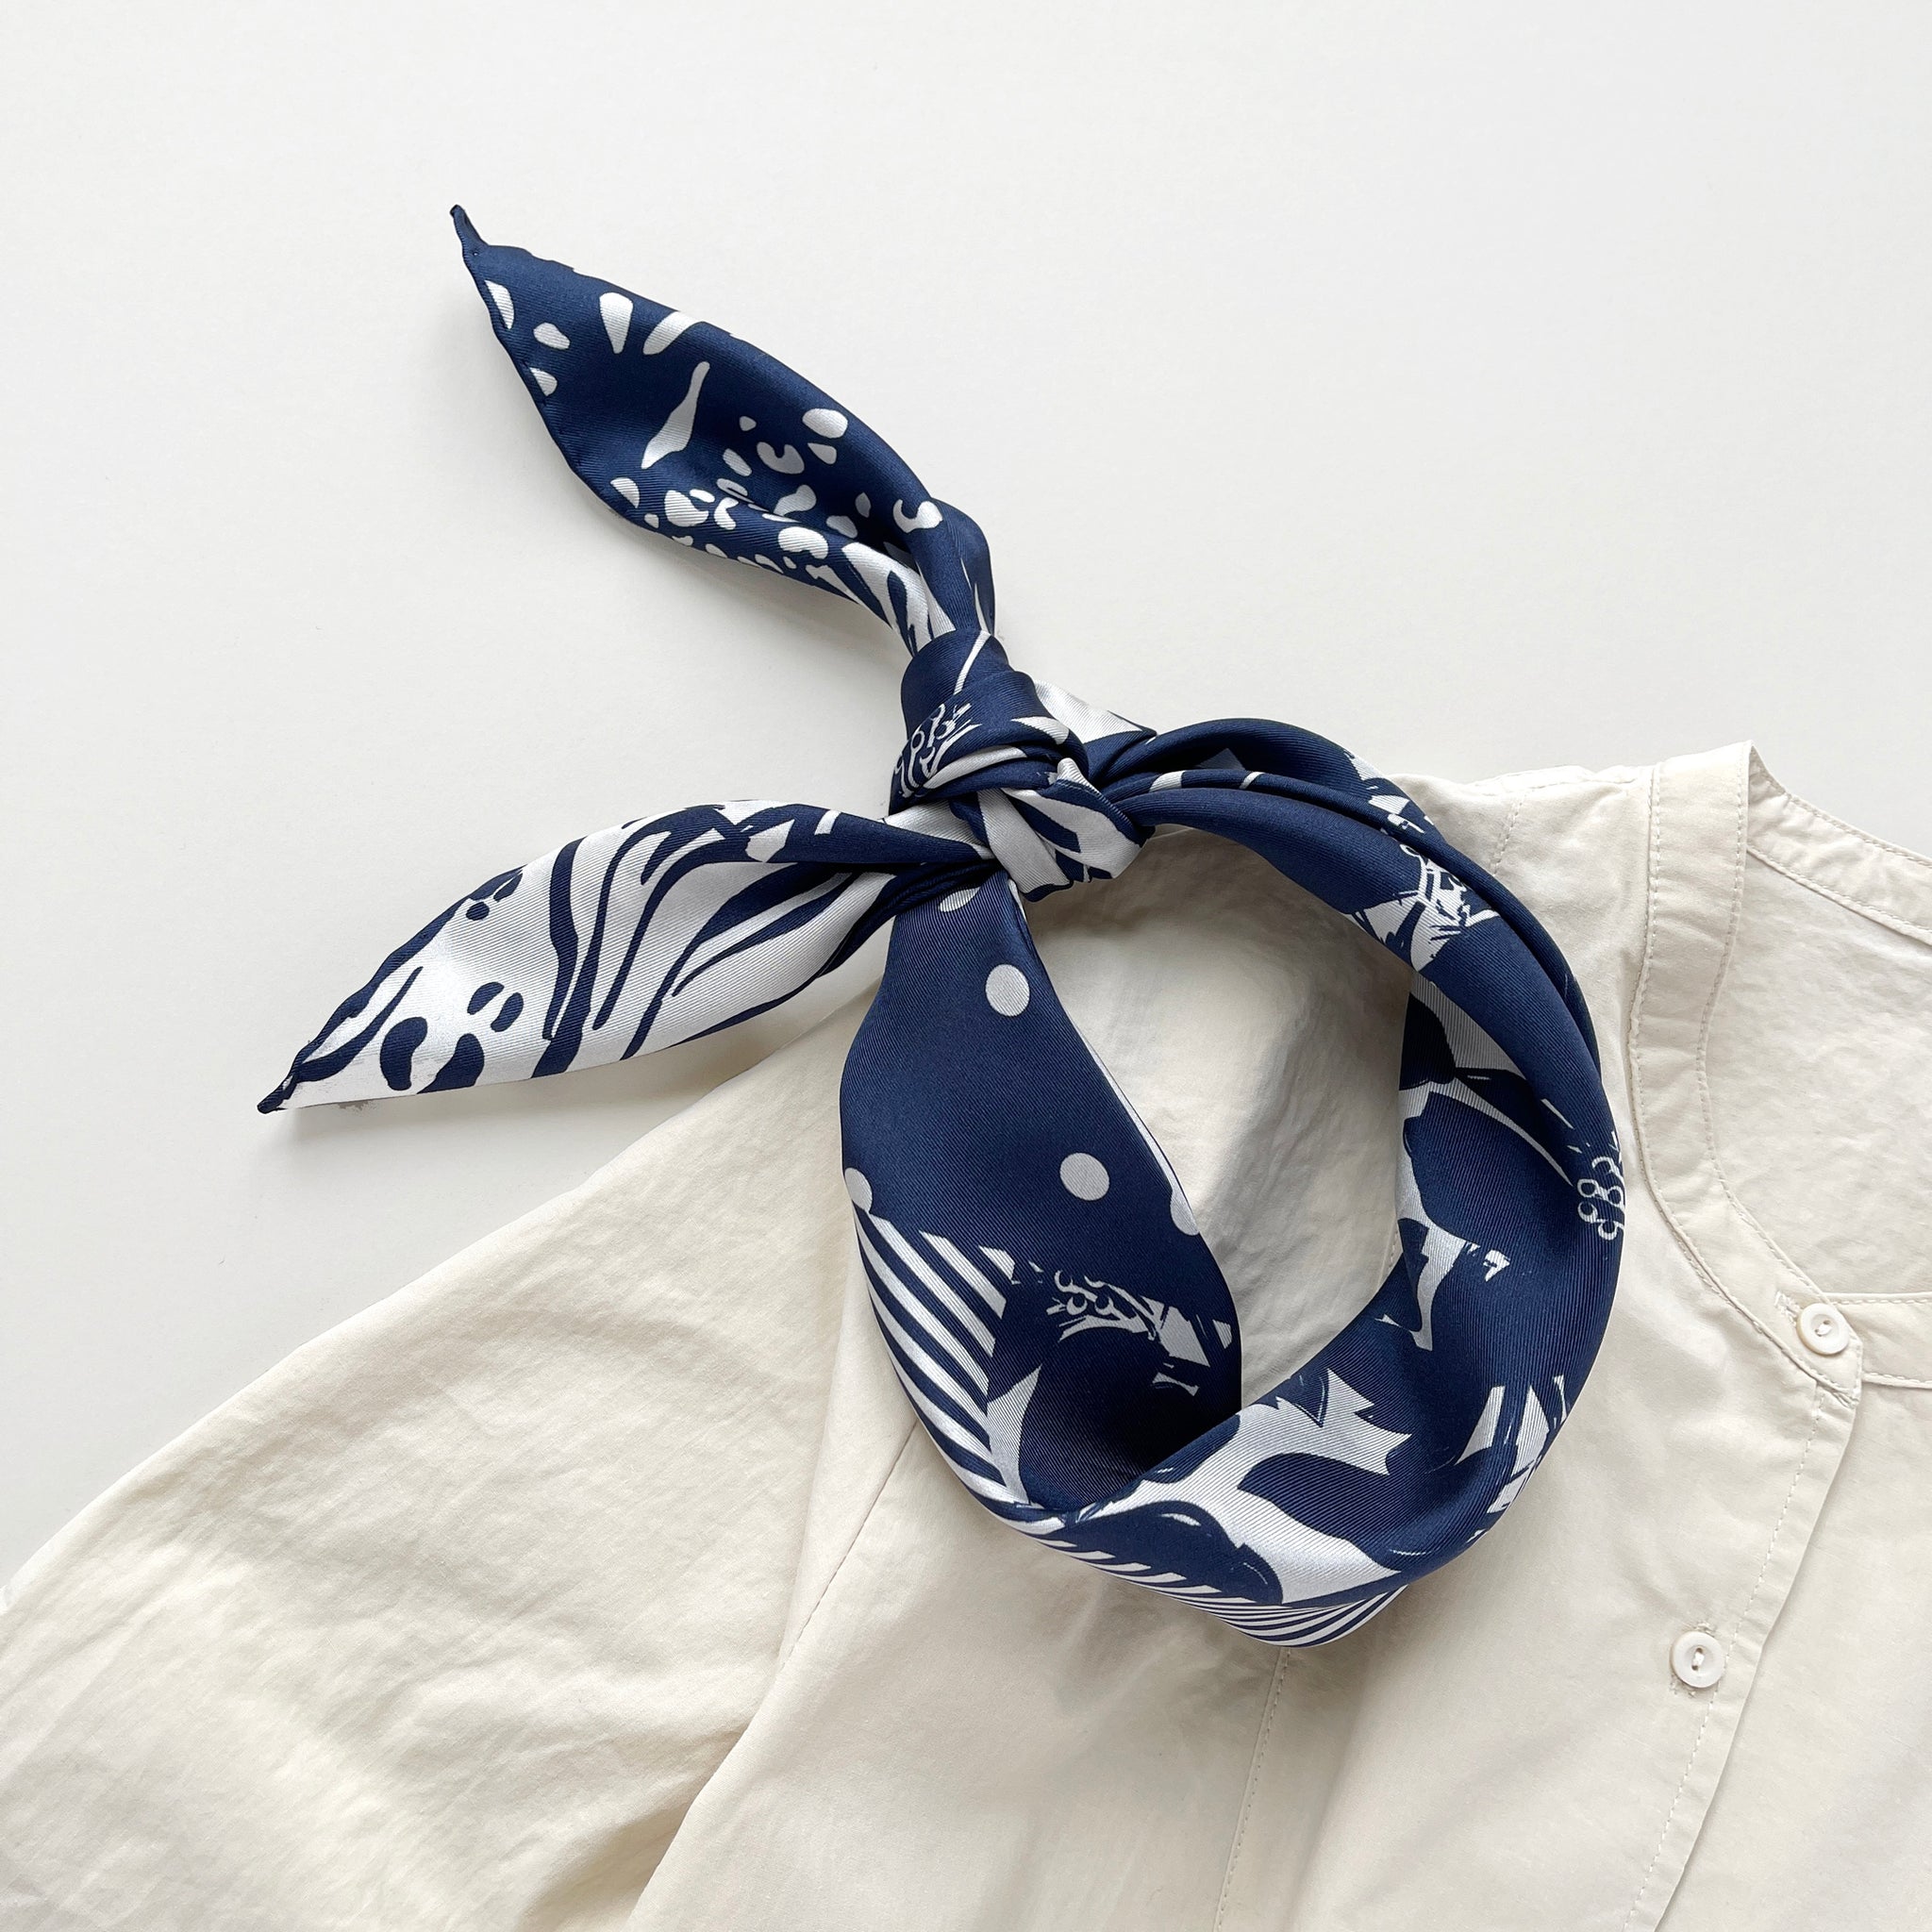 a navy blue and white square silk scarf featuring the combination of floral motifs, polka dots, and stripes prints with hand-rolled edges, tied as a headband, paired with a light beige women's shirt